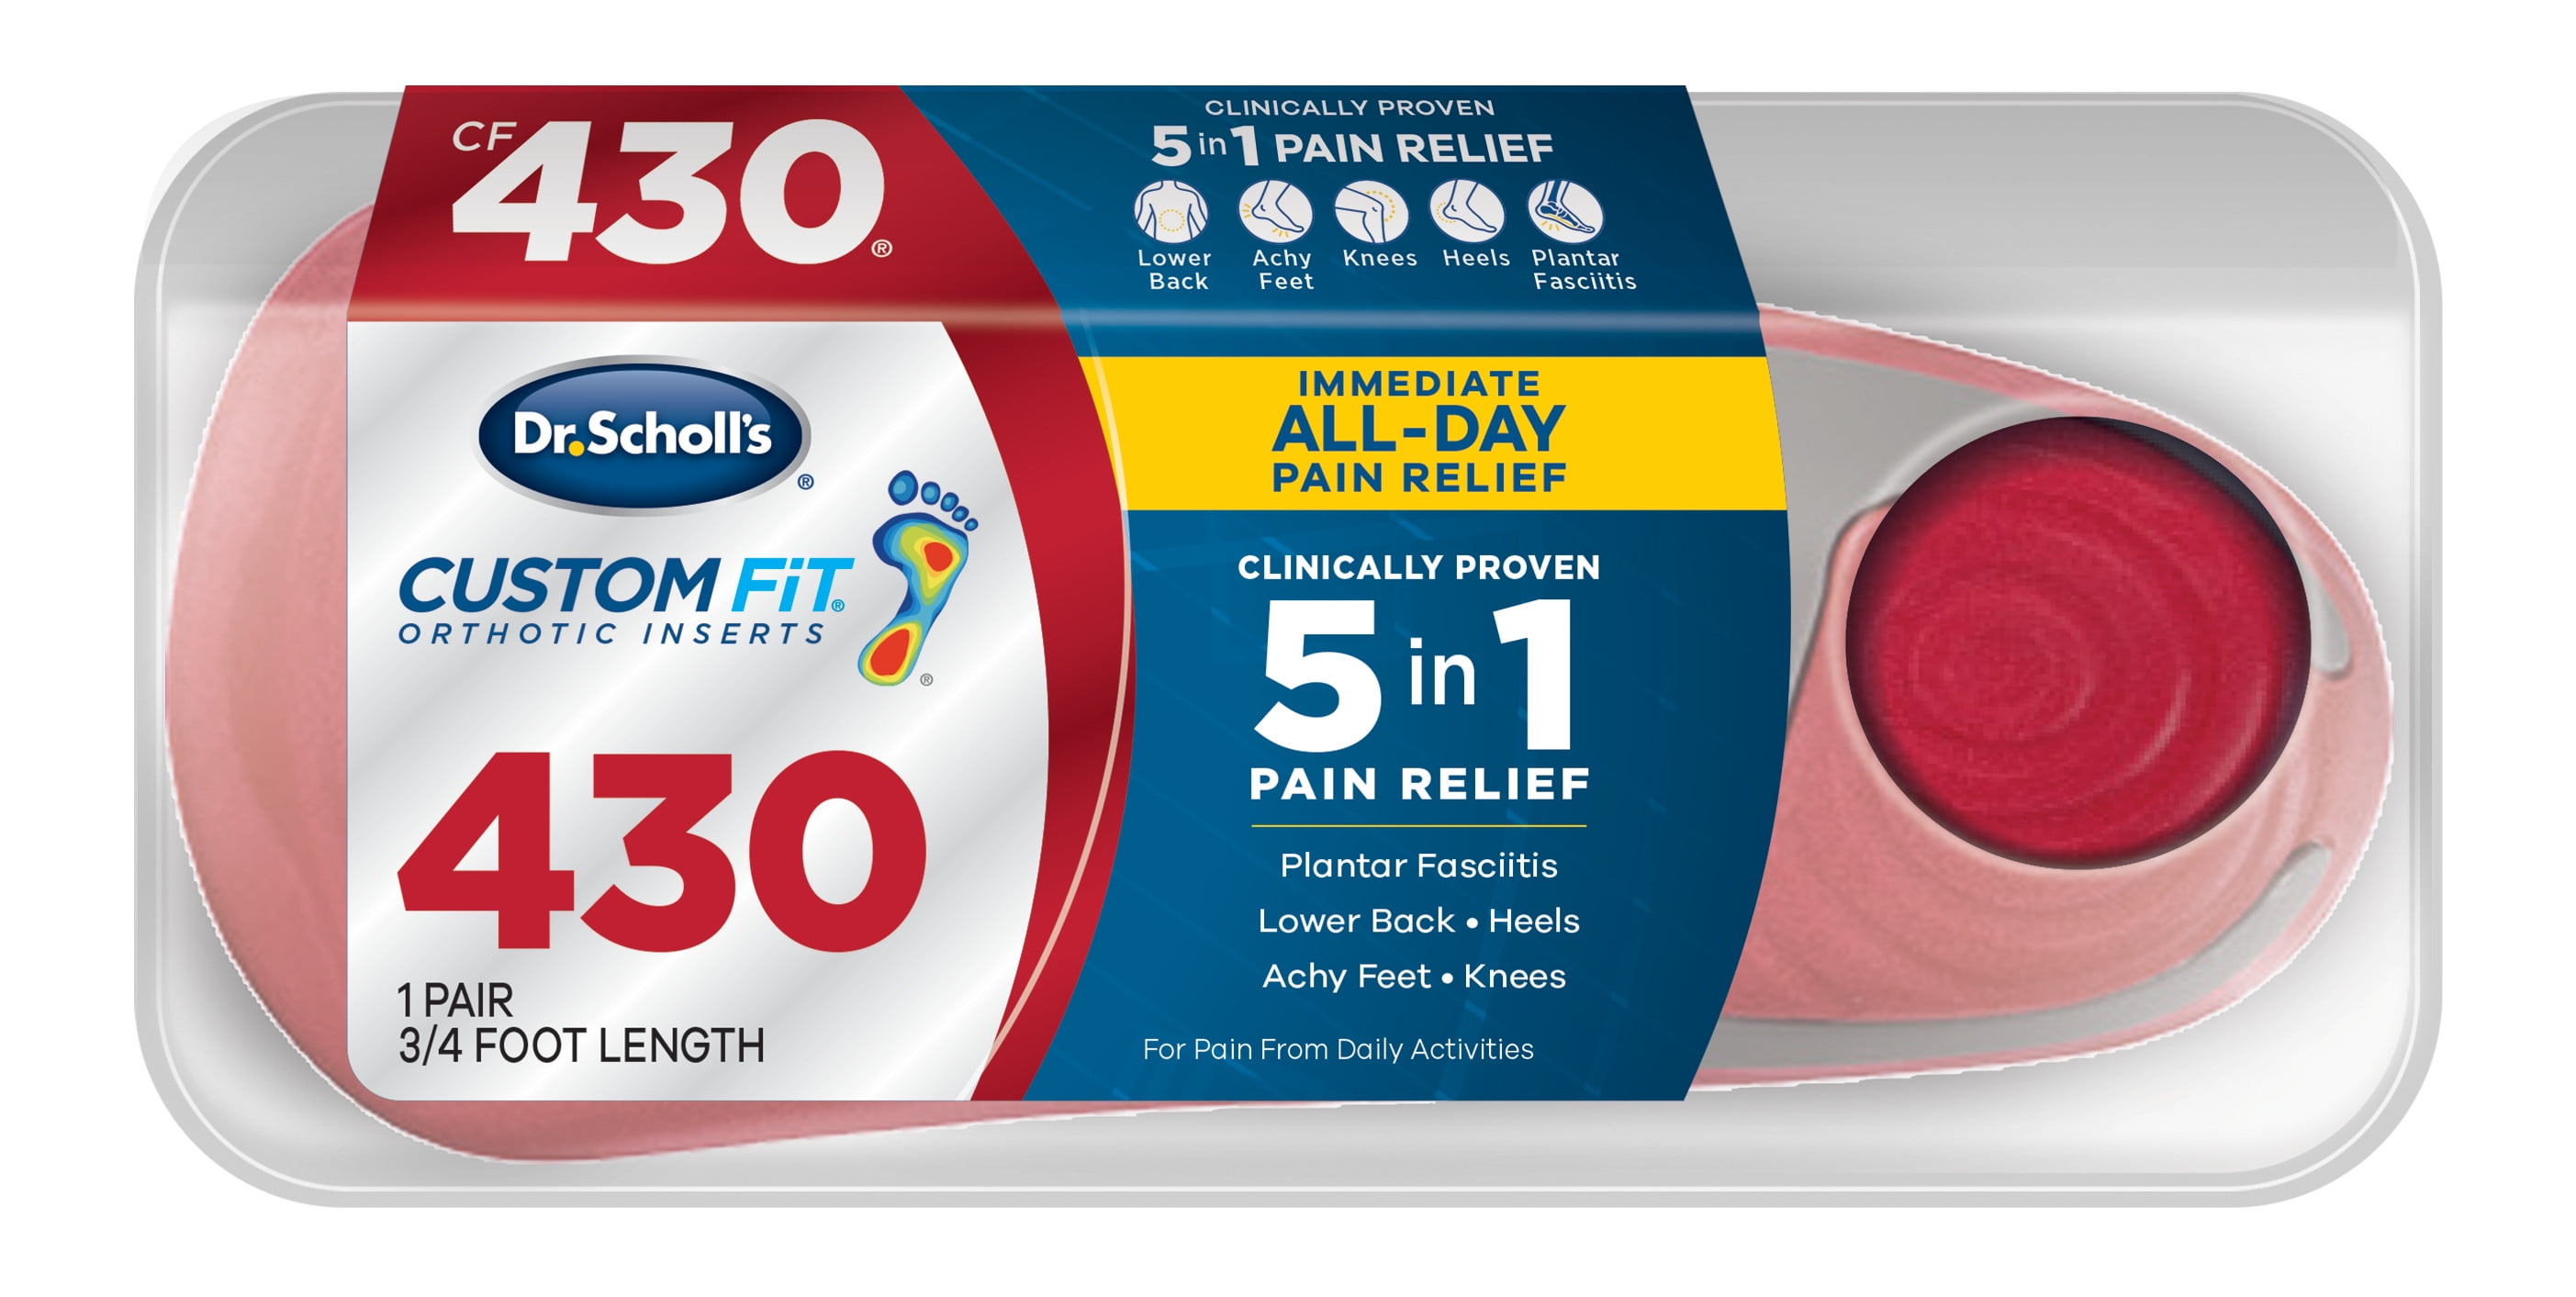 Dr Scholls Custom Fit CF 430 Orthotic Insole Shoe Inserts For Foot Knee and Lower Back Relief 1 Pair